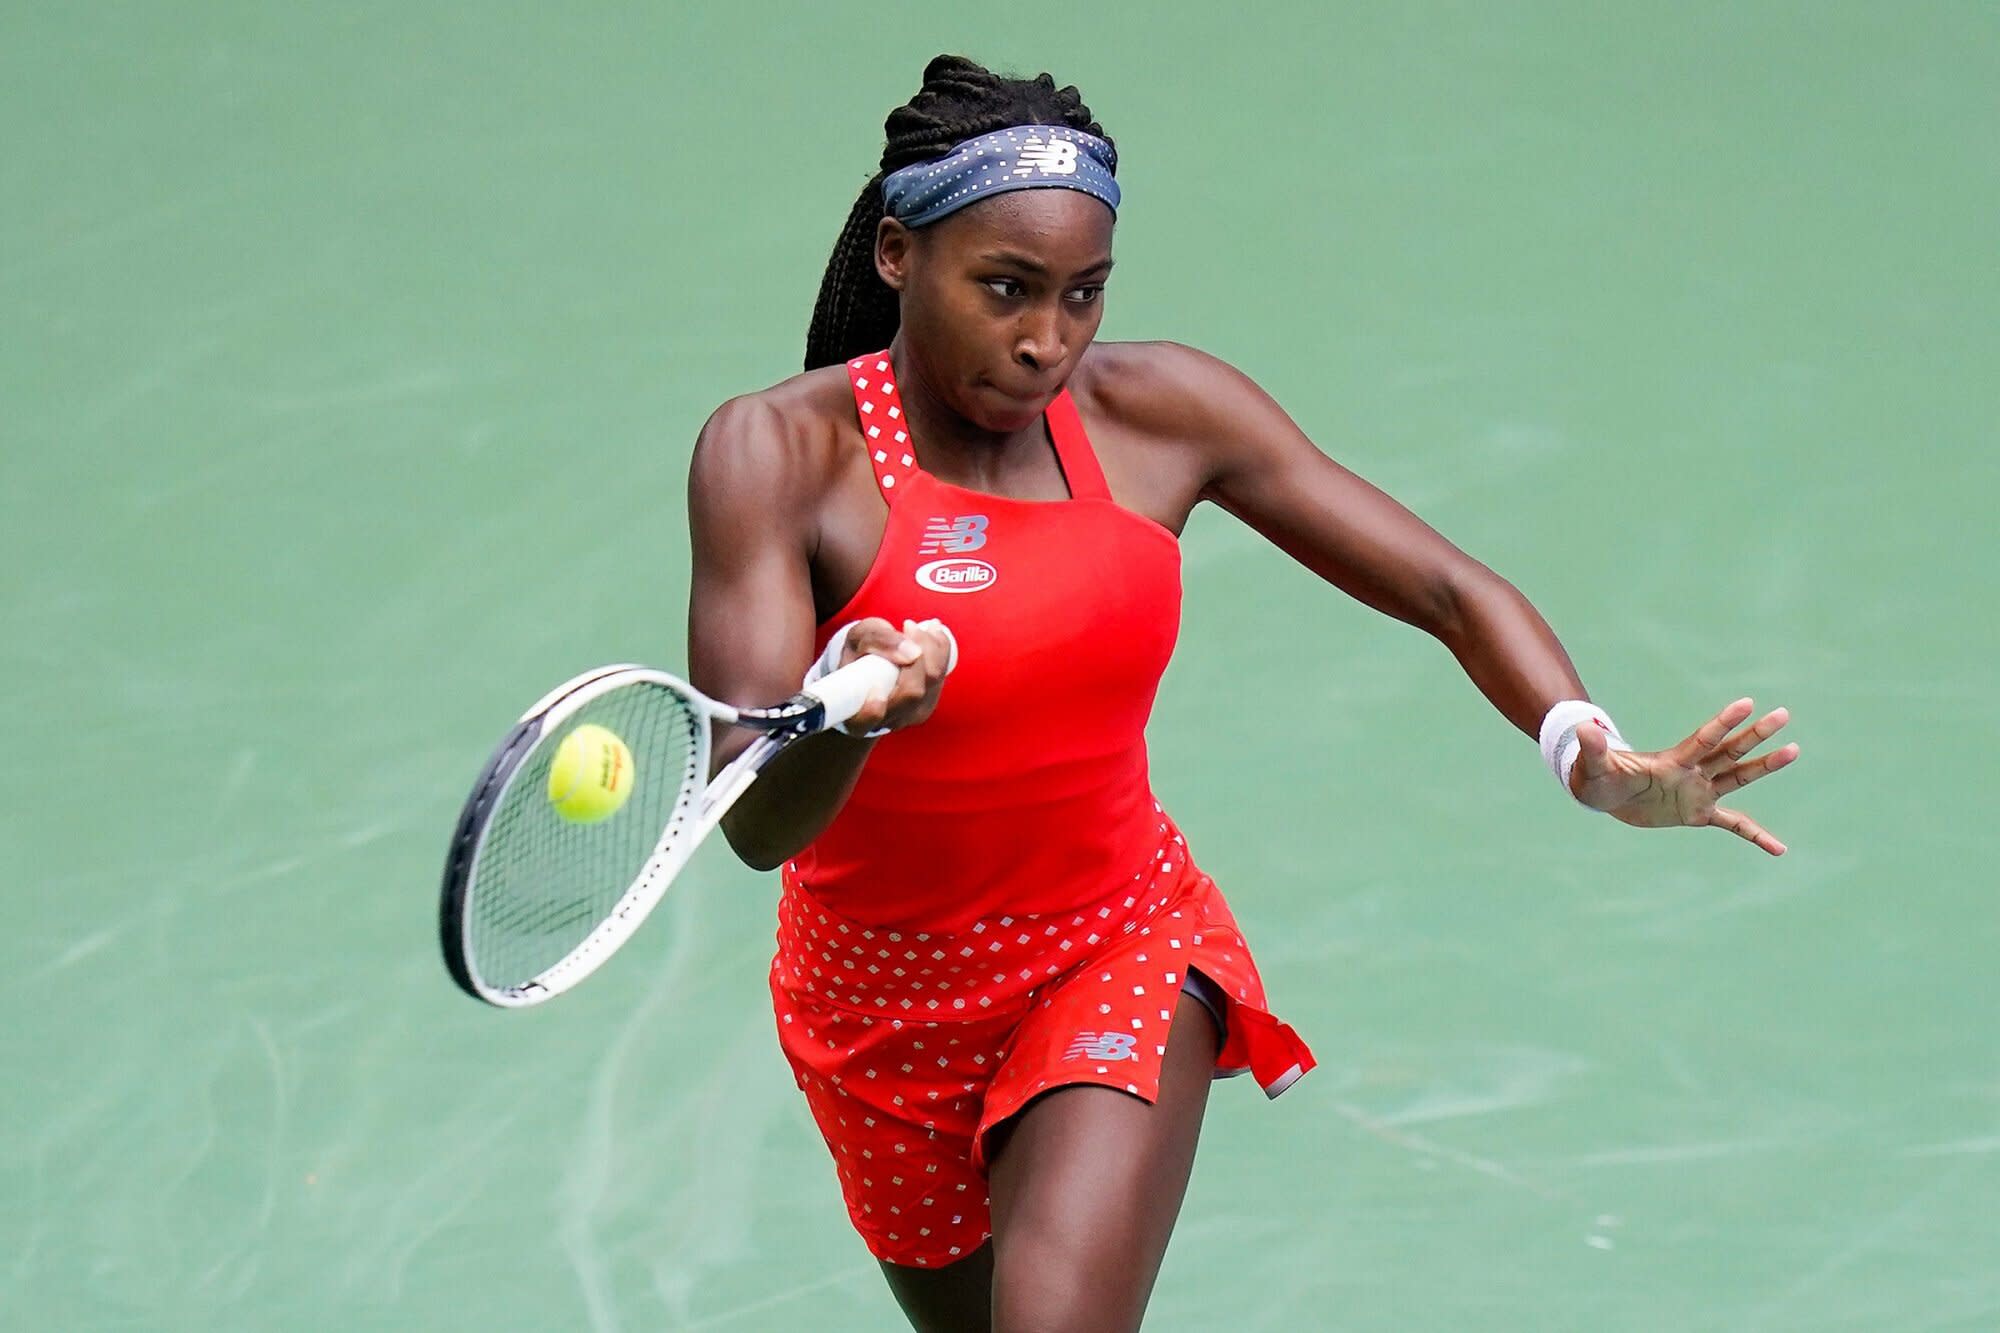 Coco Gauff Loses First Round Match at U.S. Open 'Going to Get Back to